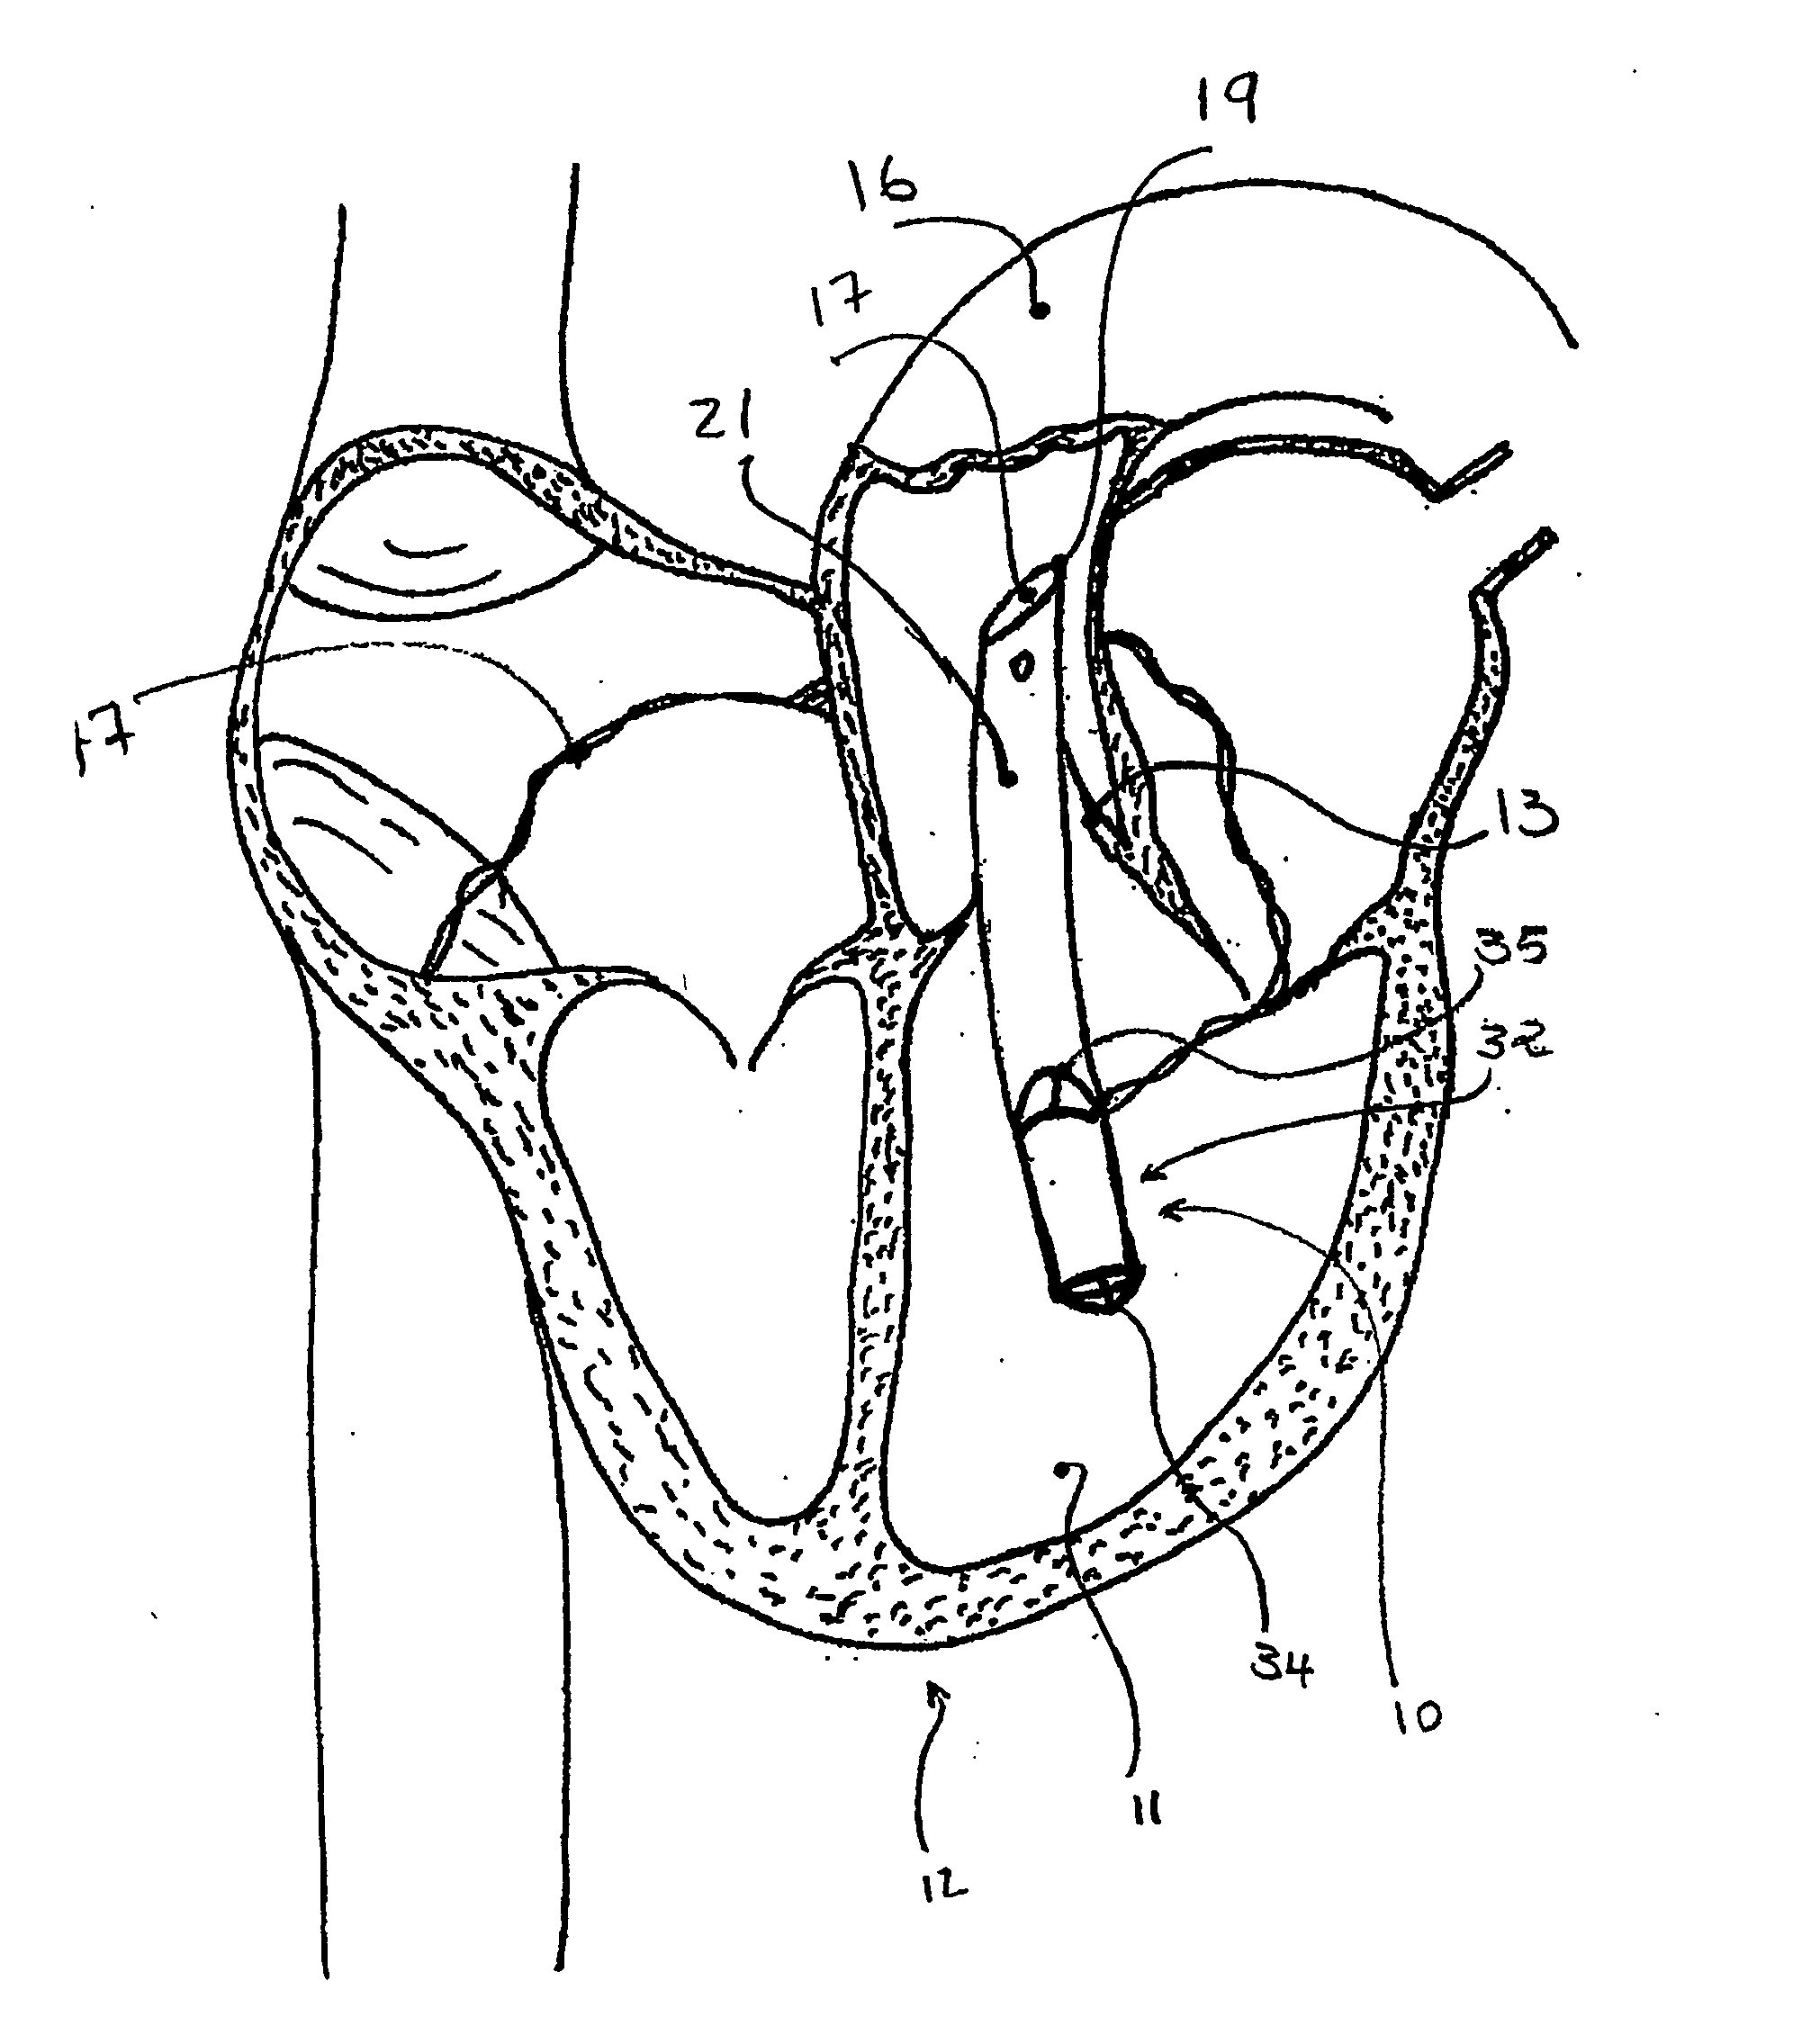 Percutaneously introduced blood pump and related methods